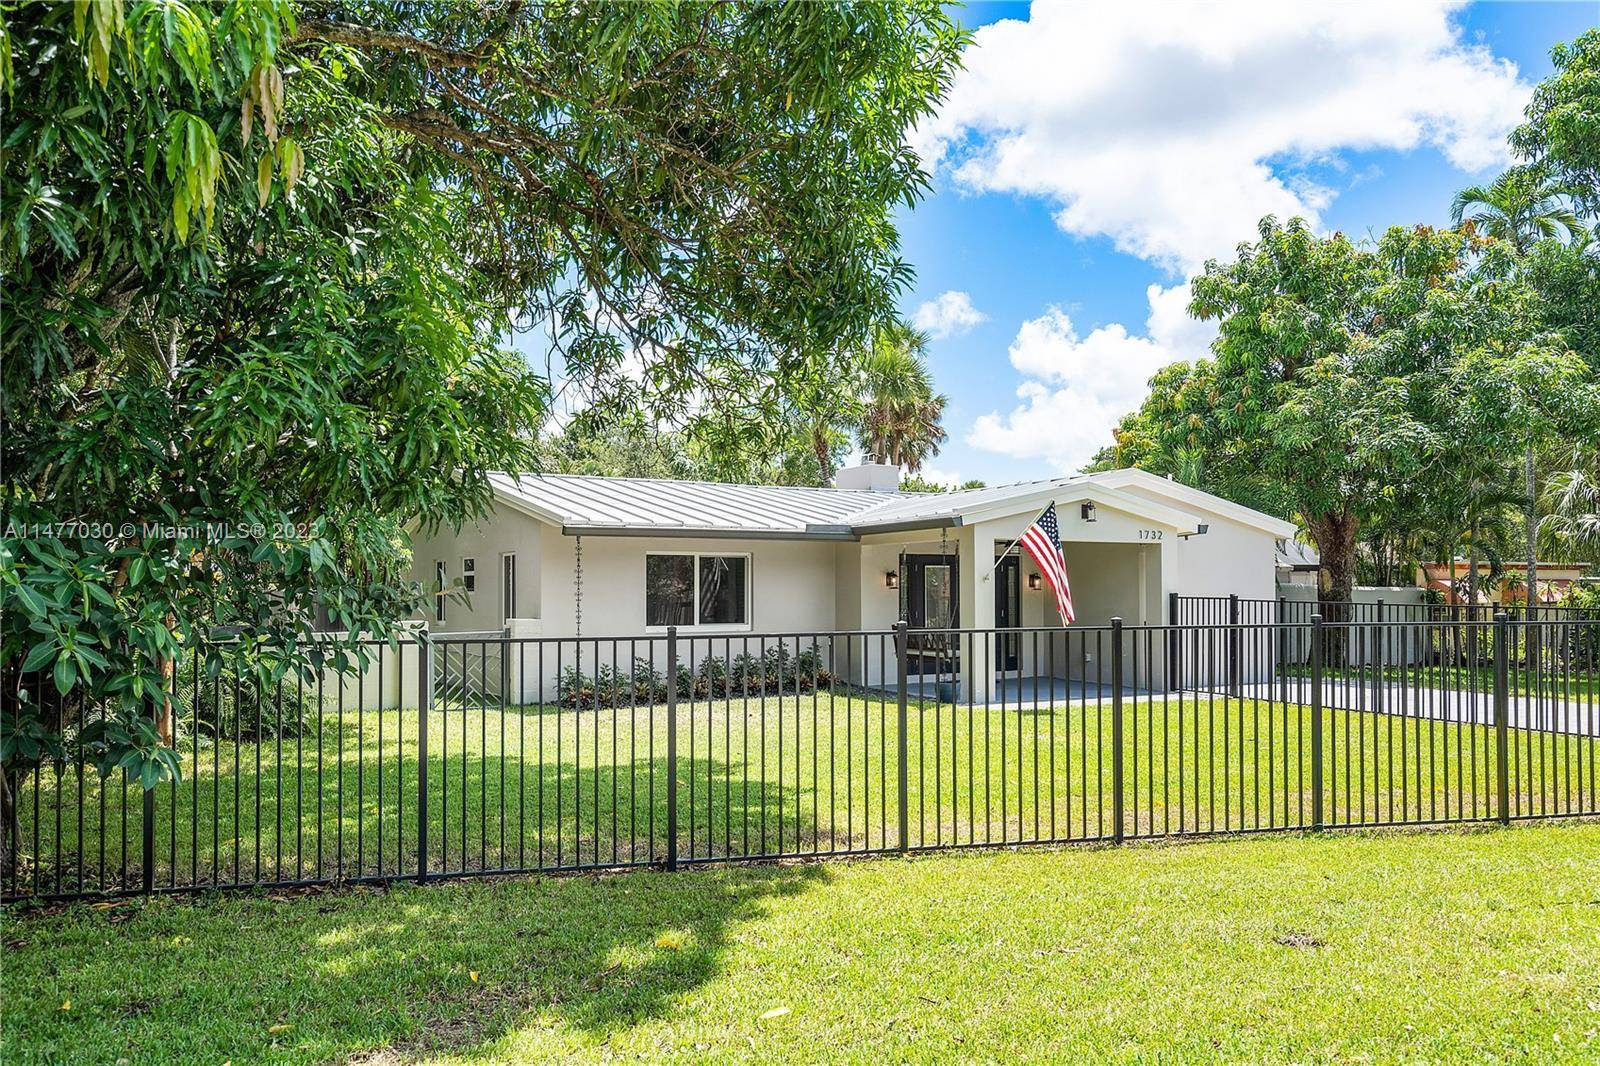 Just Reduced Beautifully renovated 3 bed, 2 bath home is located in the highly sought after Shady Banks neighborhood of Fort Lauderdale.